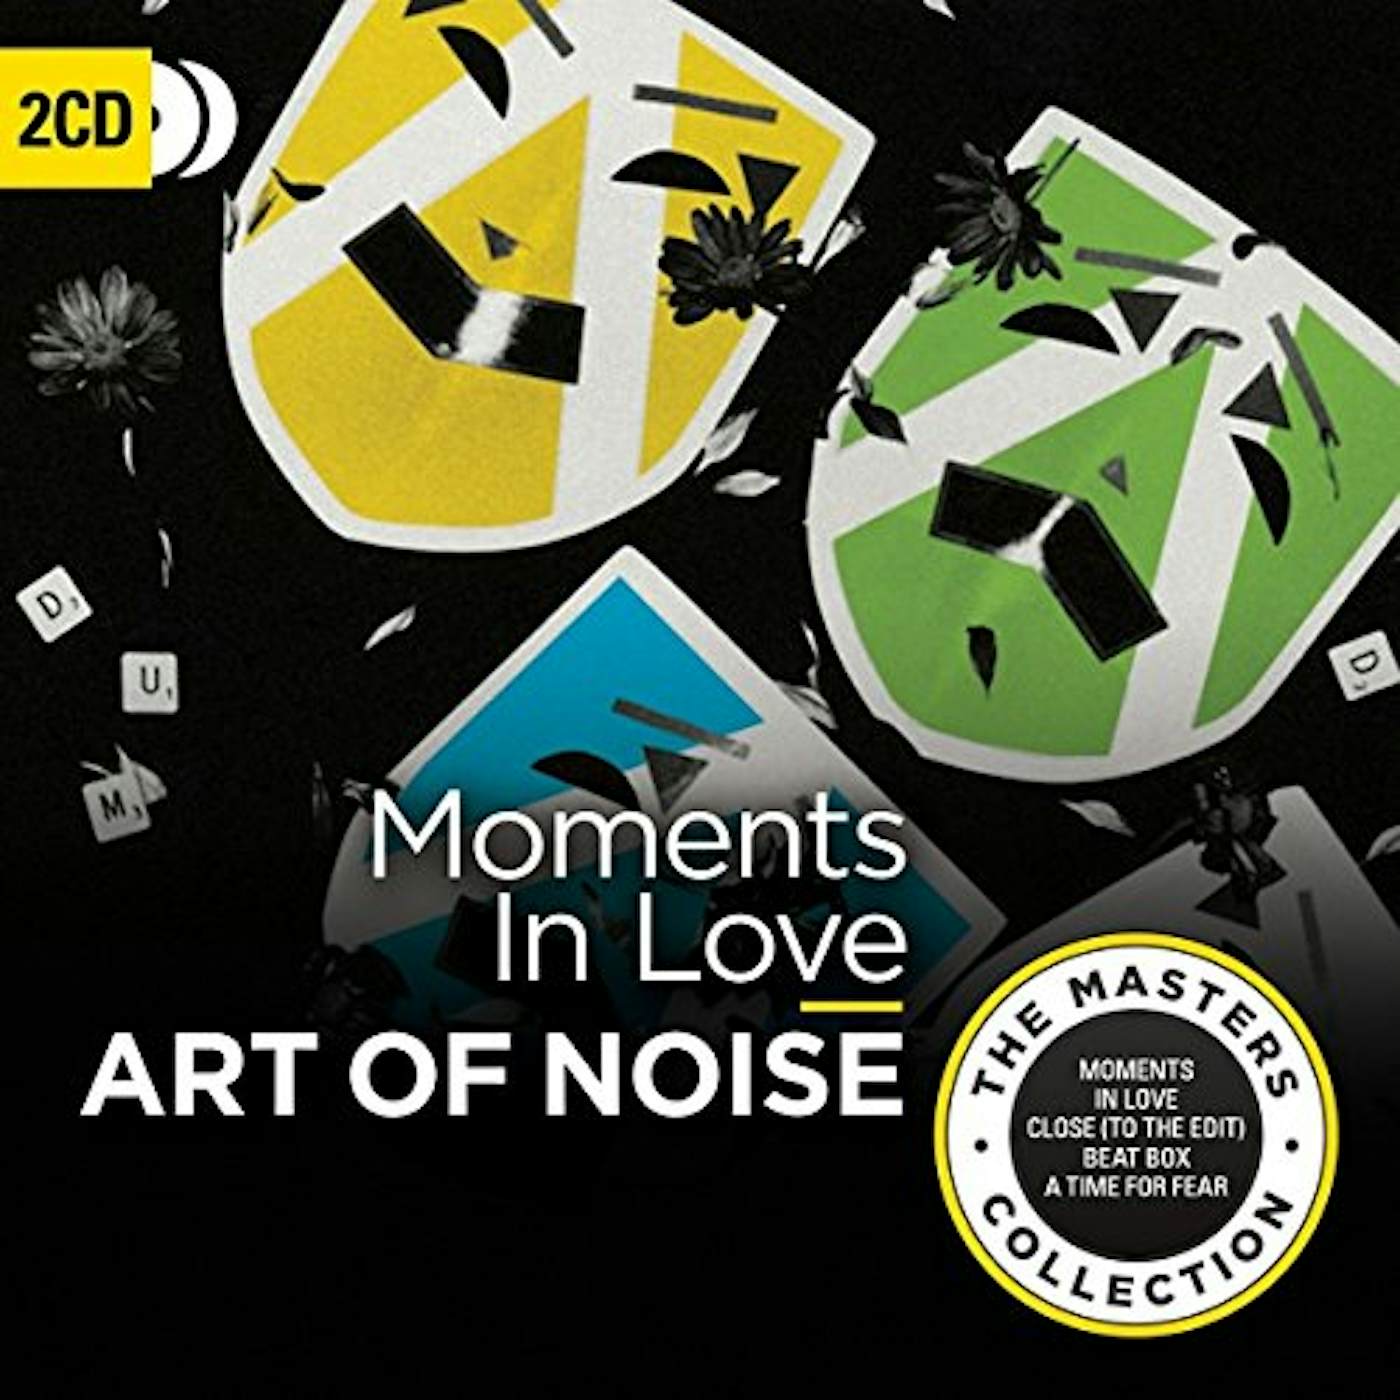 The Art Of Noise MOMENTS IN LOVE CD